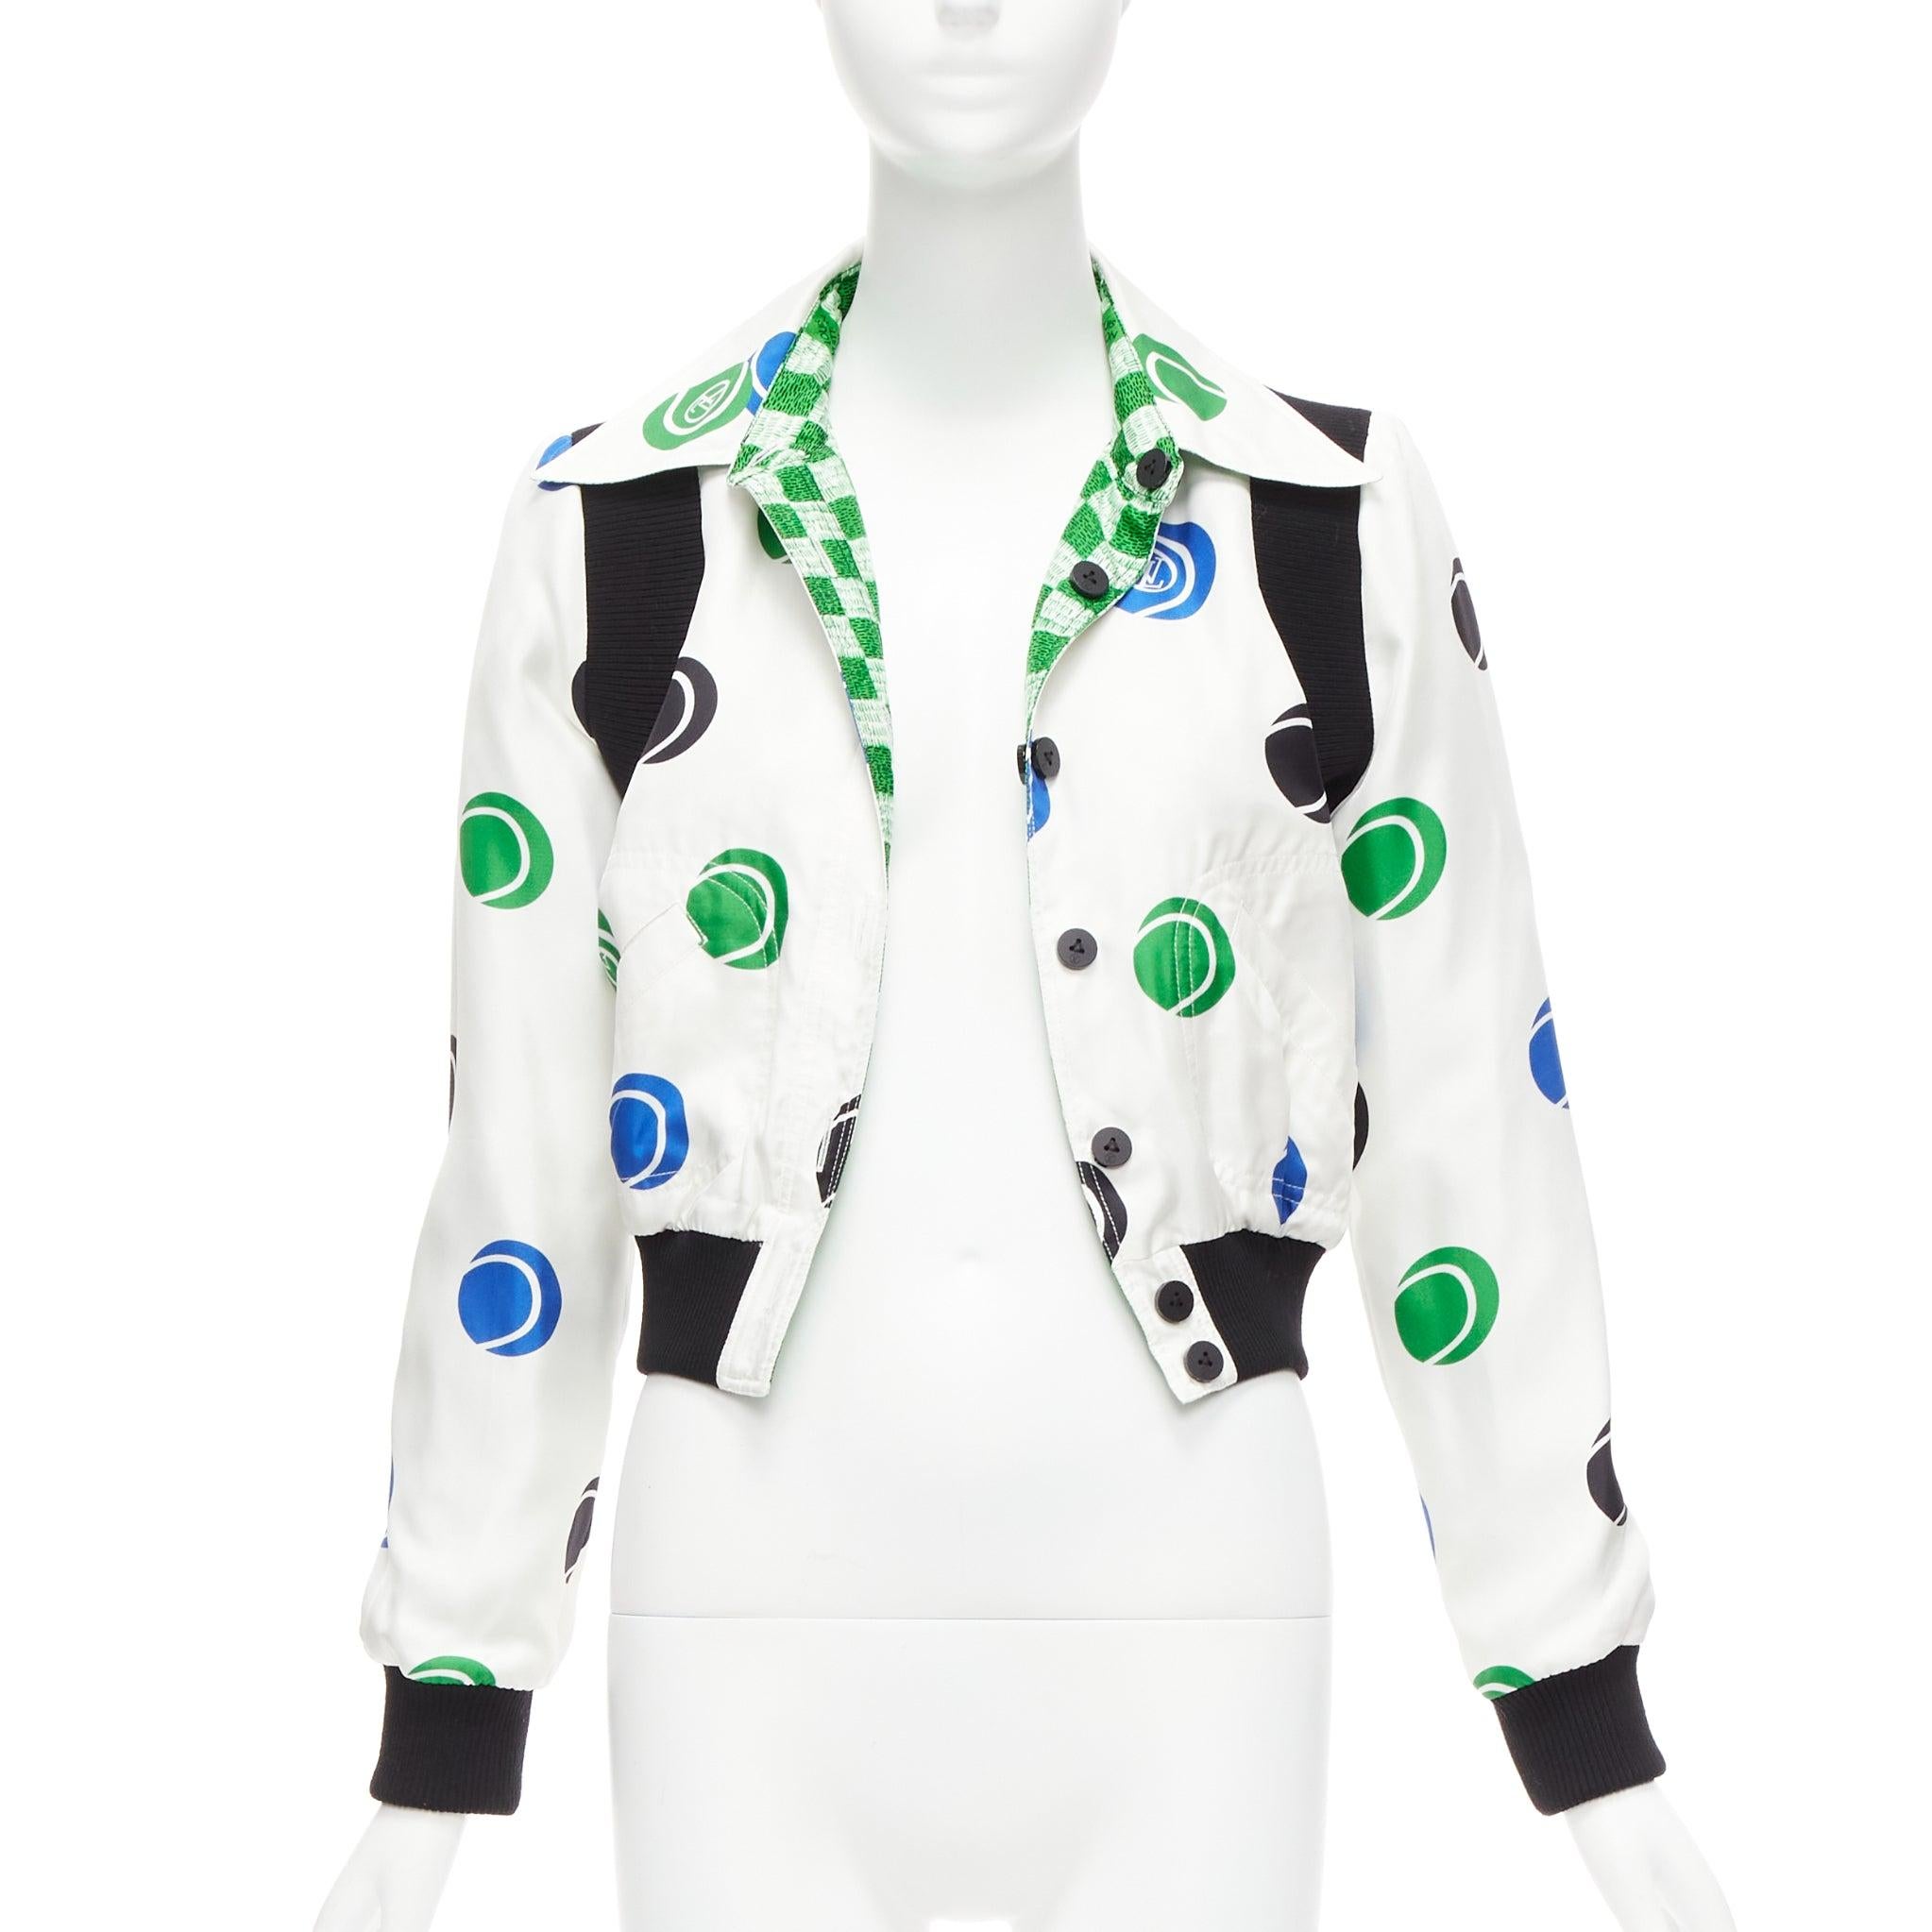 LOUIS VUITTON 2022 100% silk Reversible green Damier cropped jacket FR34 XS
Reference: AAWC/A00616
Brand: Louis Vuitton
Designer: Nicolas Ghesquiere
Collection: 2022 Fall Winter
Material: Silk
Color: Green, Blue
Pattern: Checkered
Closure: